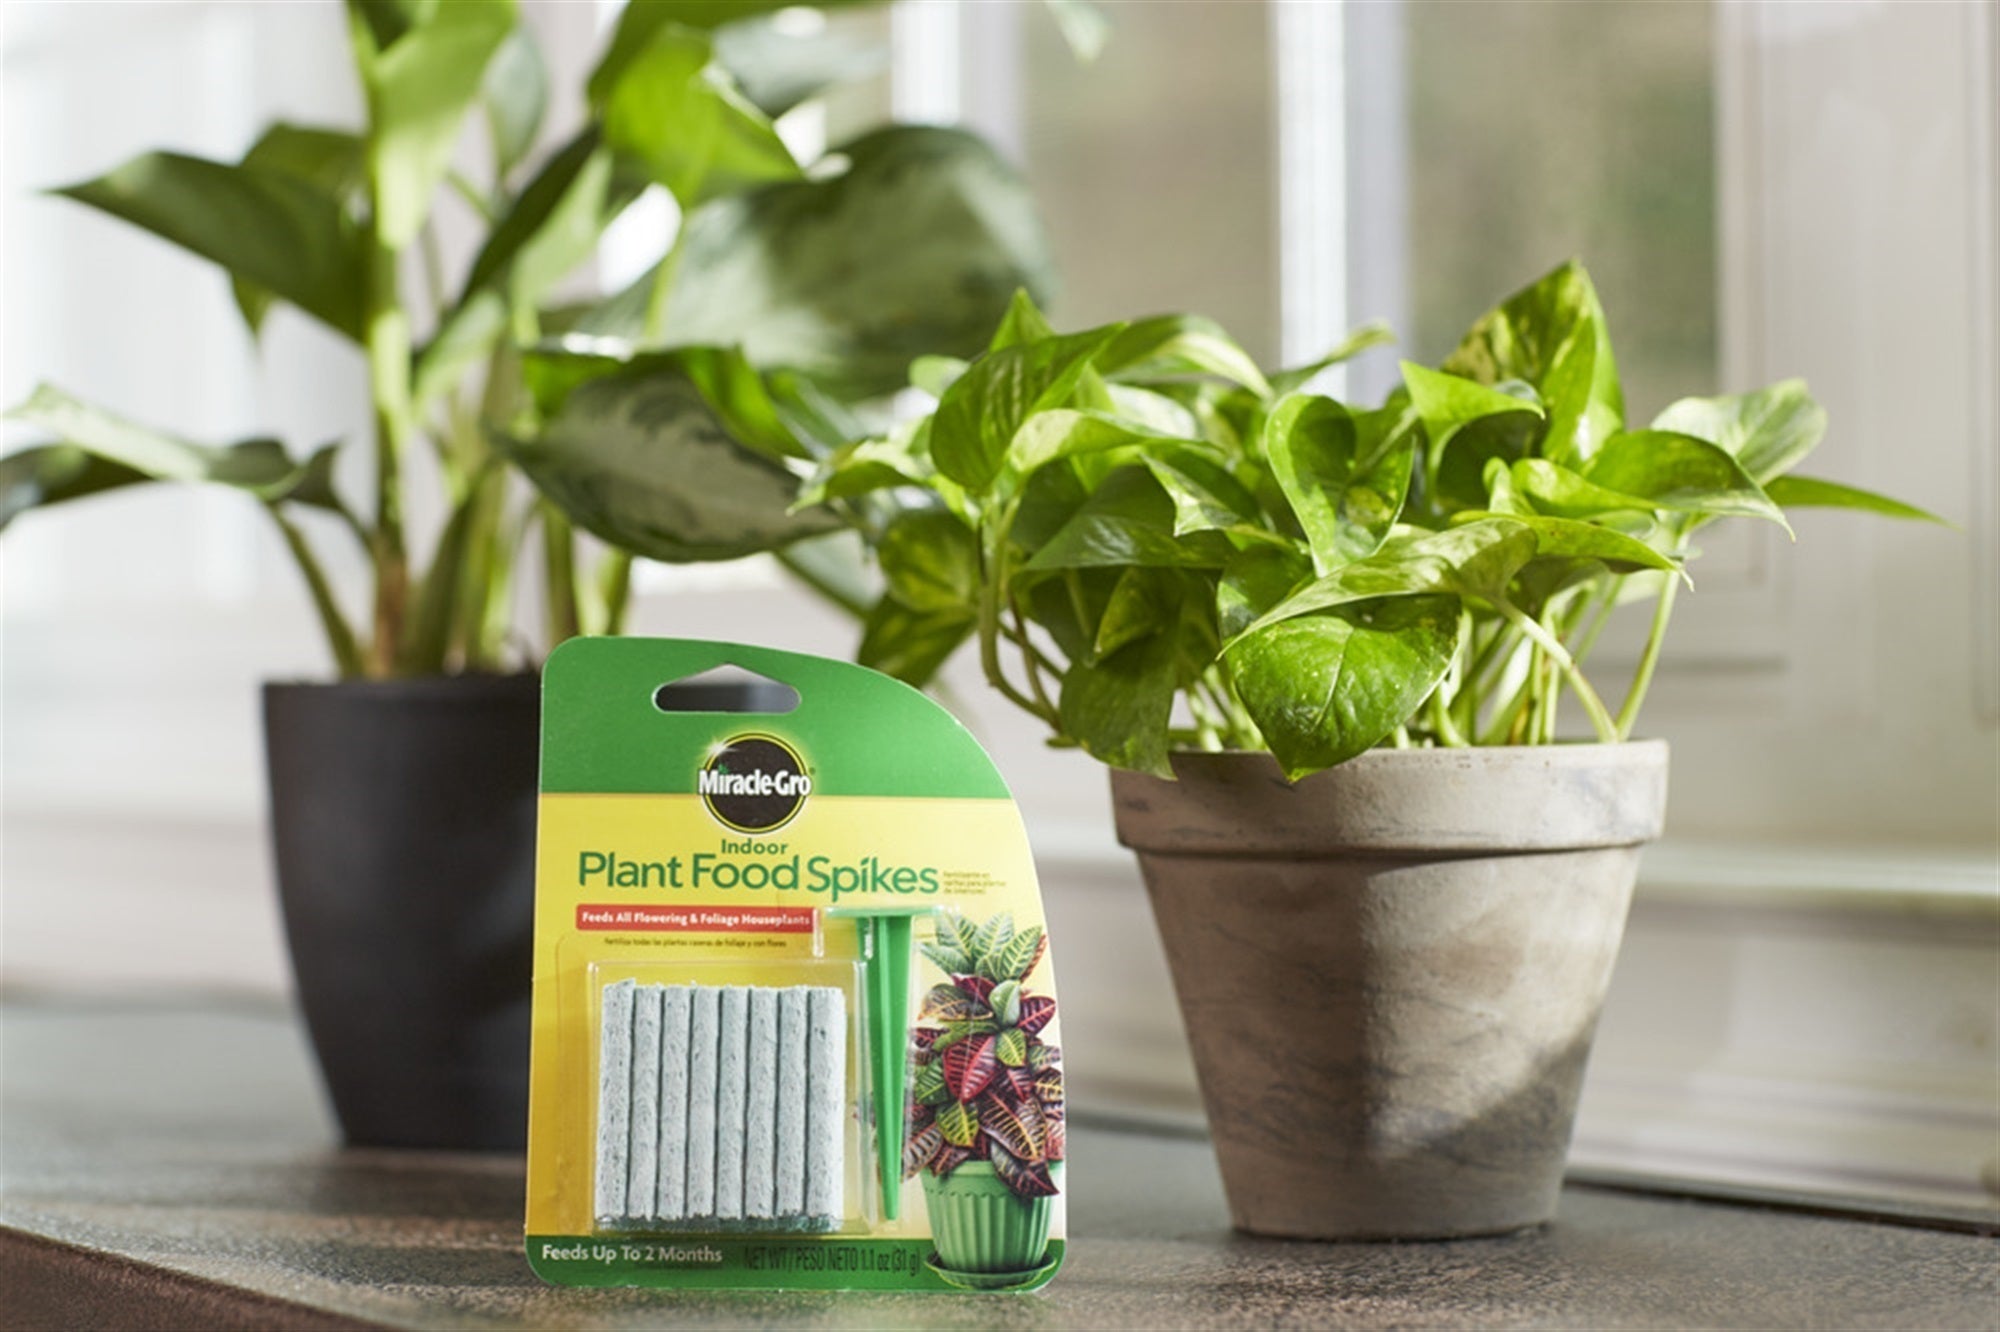 Miracle-Gro Indoor Plant Food Spikes, Pack of 24